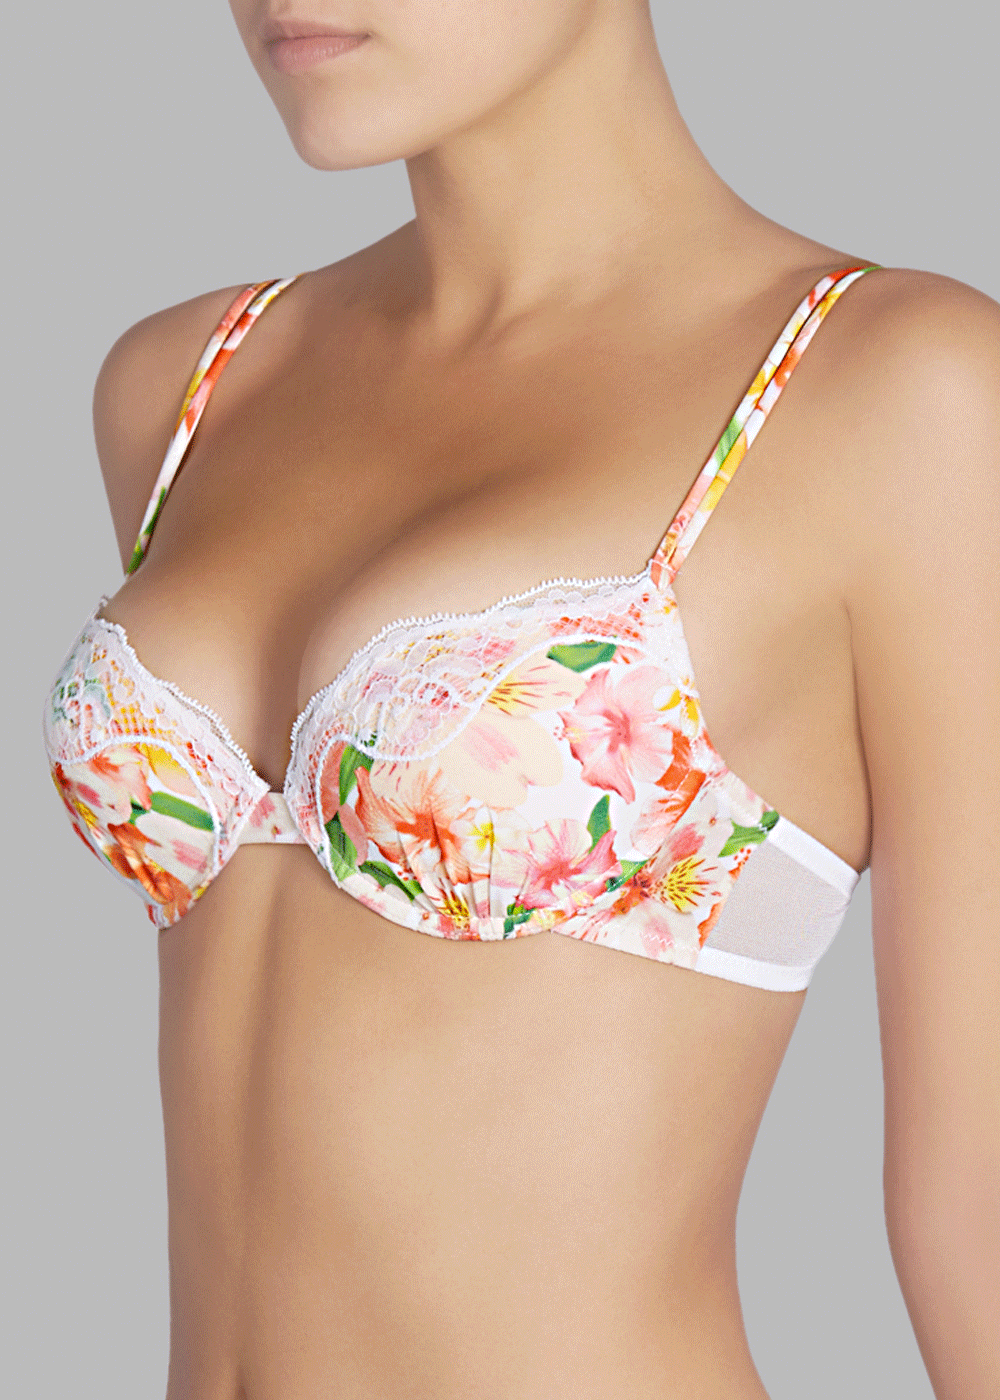 Soutien-gorge Push-Up Andres Sarda Flowers